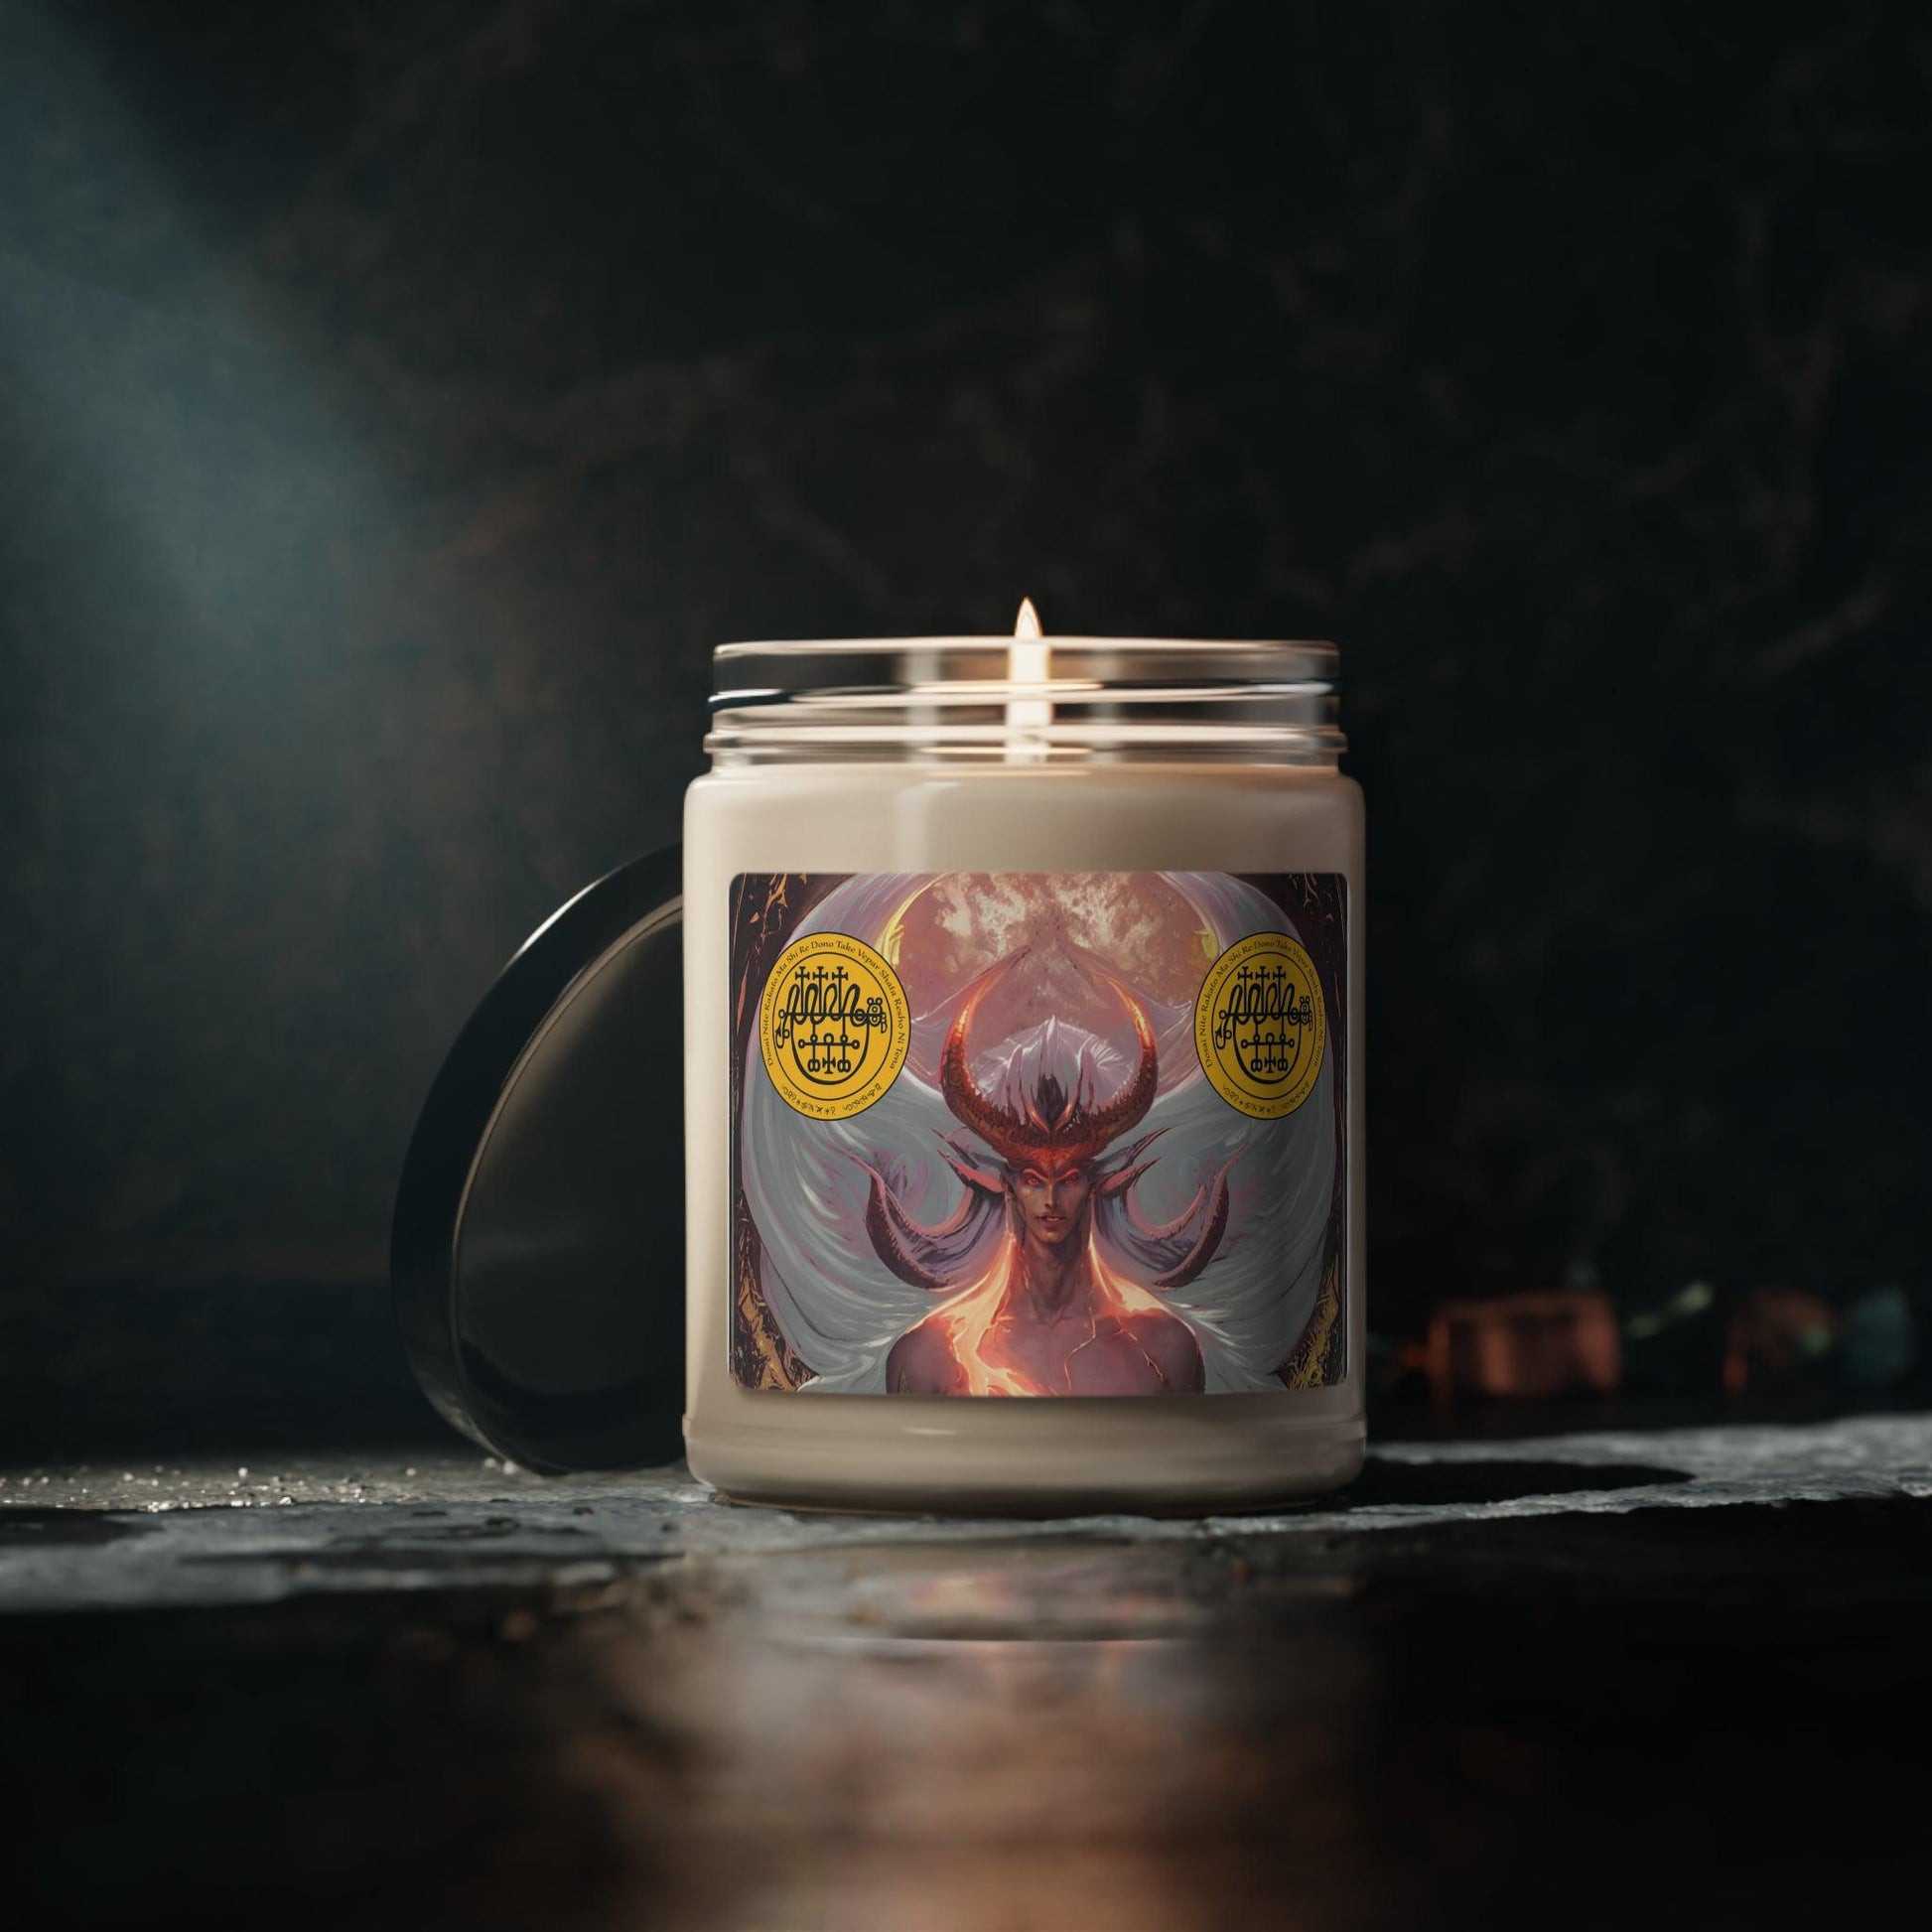 Demon-Vepar-Altar-Scented-Soy-Candle-for-offerings-rituals-initiations-o-praying-and-medtation-15